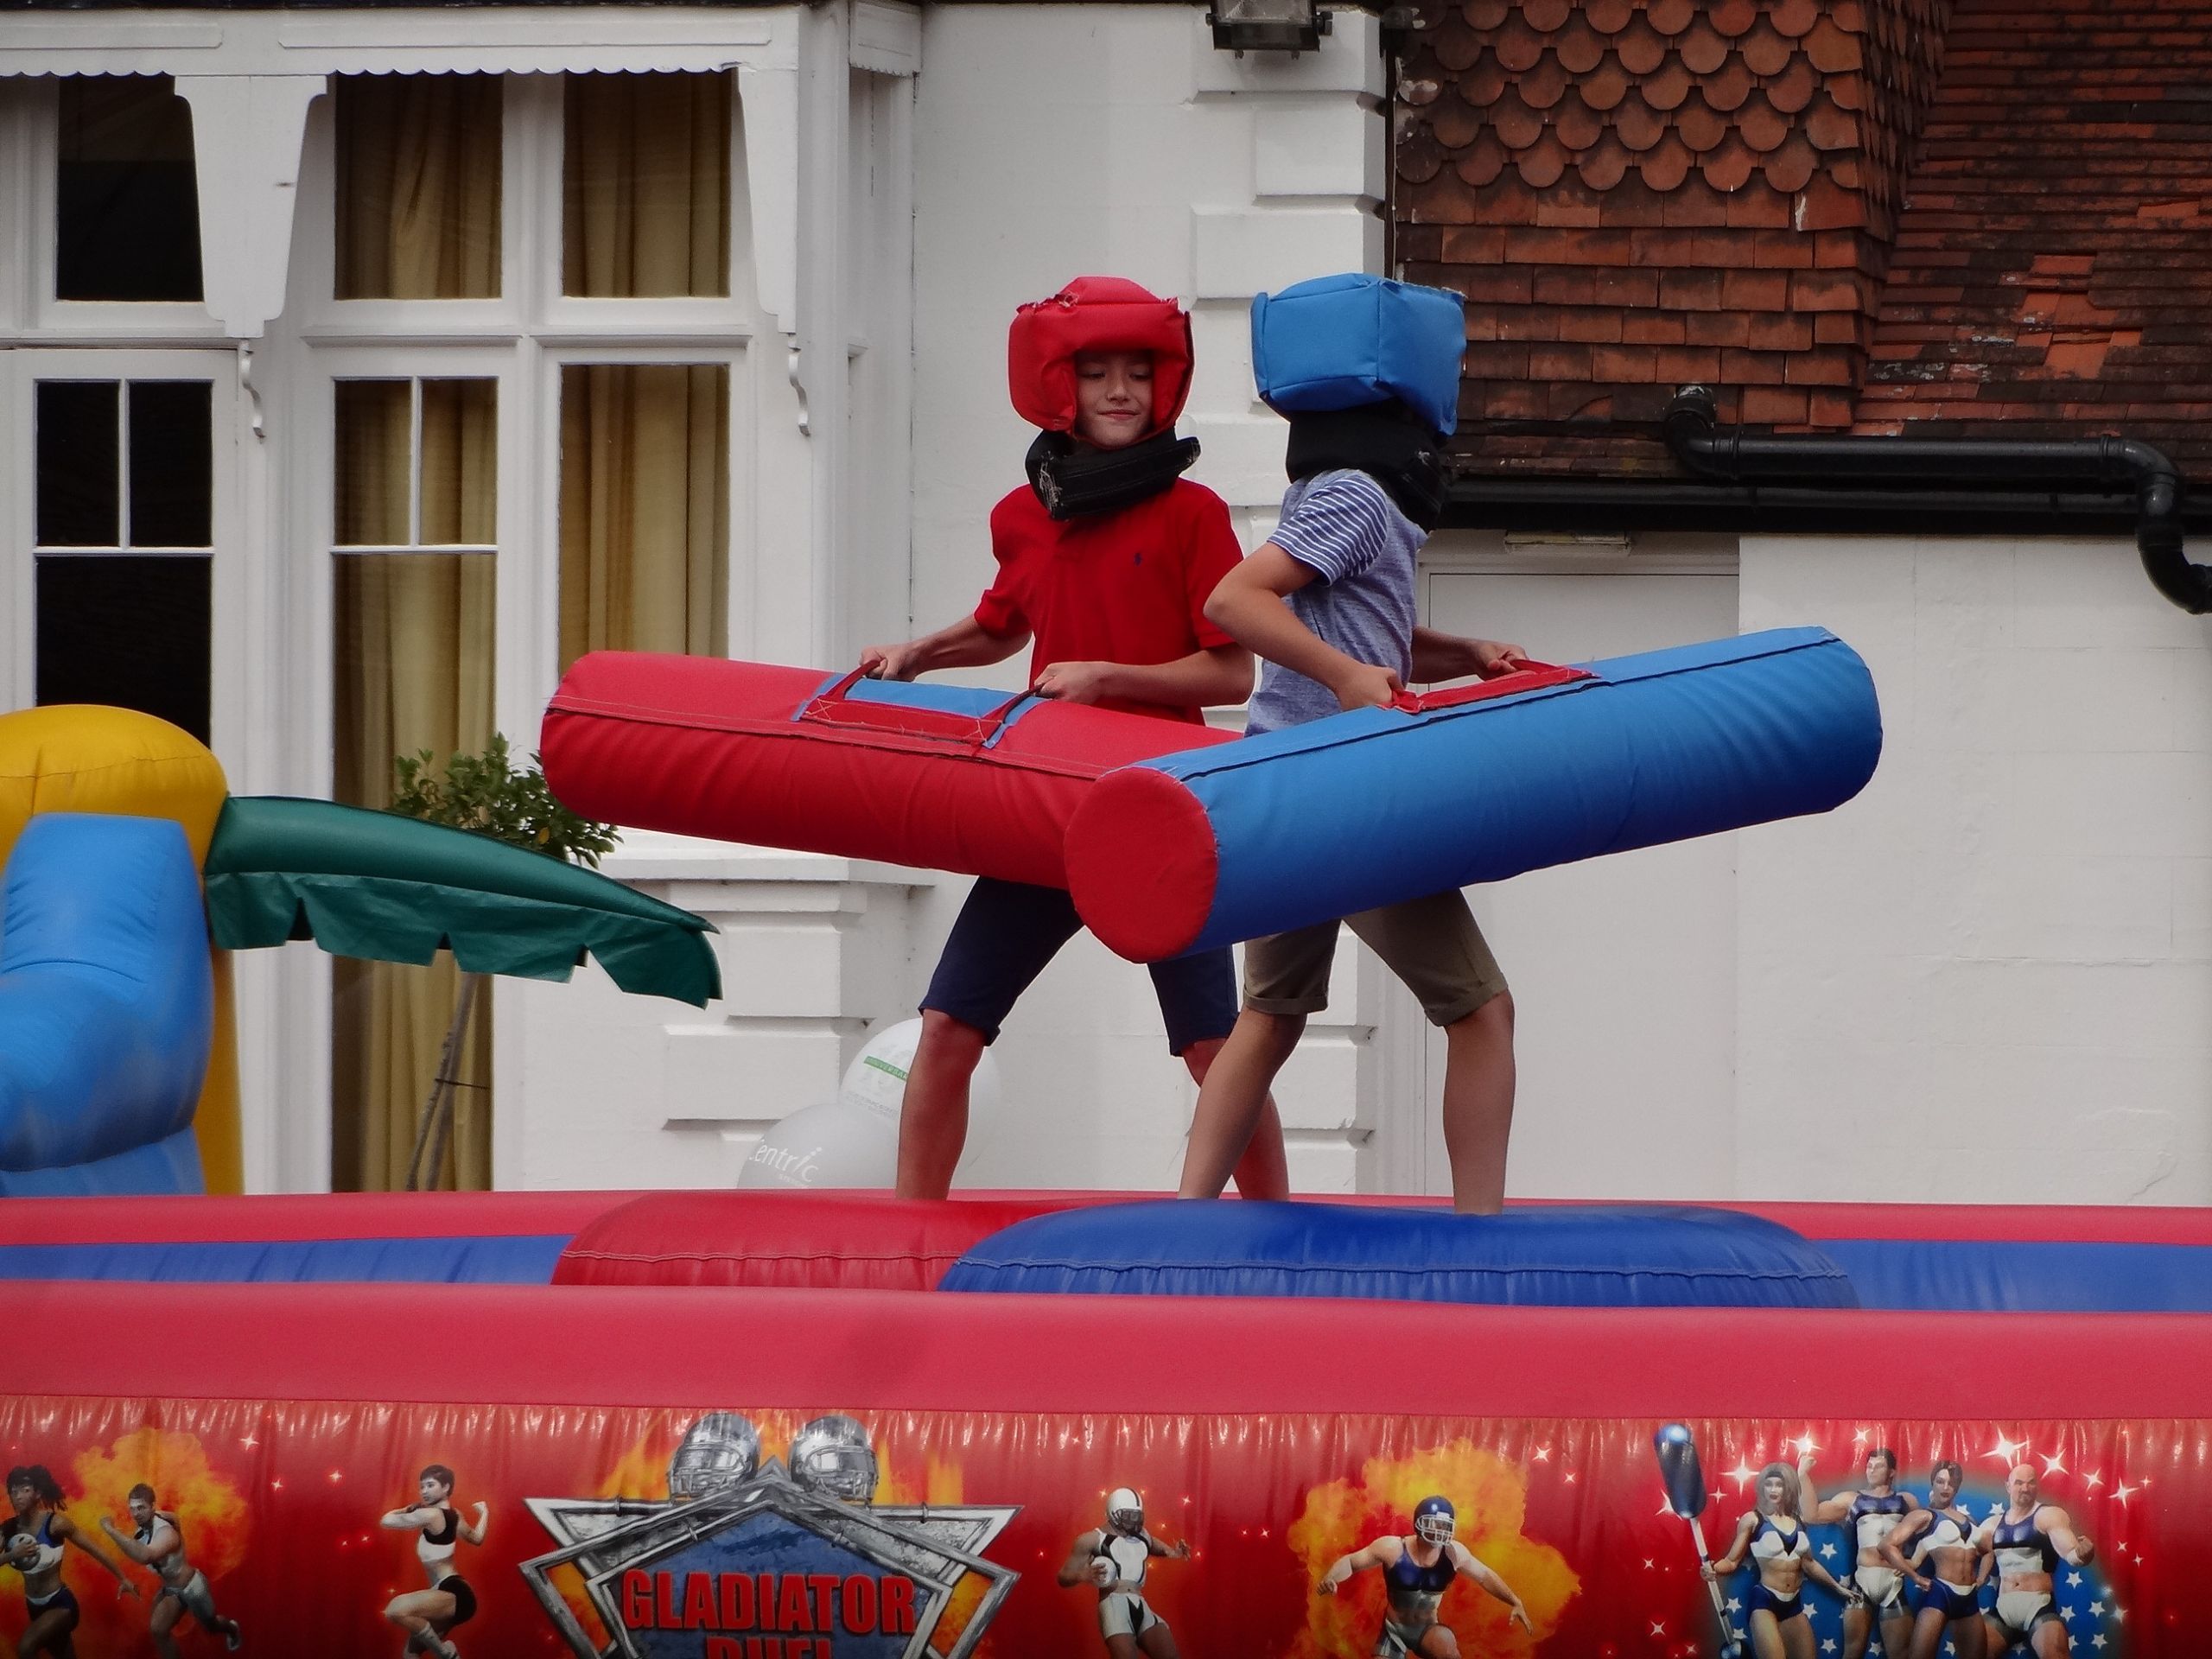 Birthday Party Entertainment For Kids
 Party Ideas London – Find a variety of exciting party